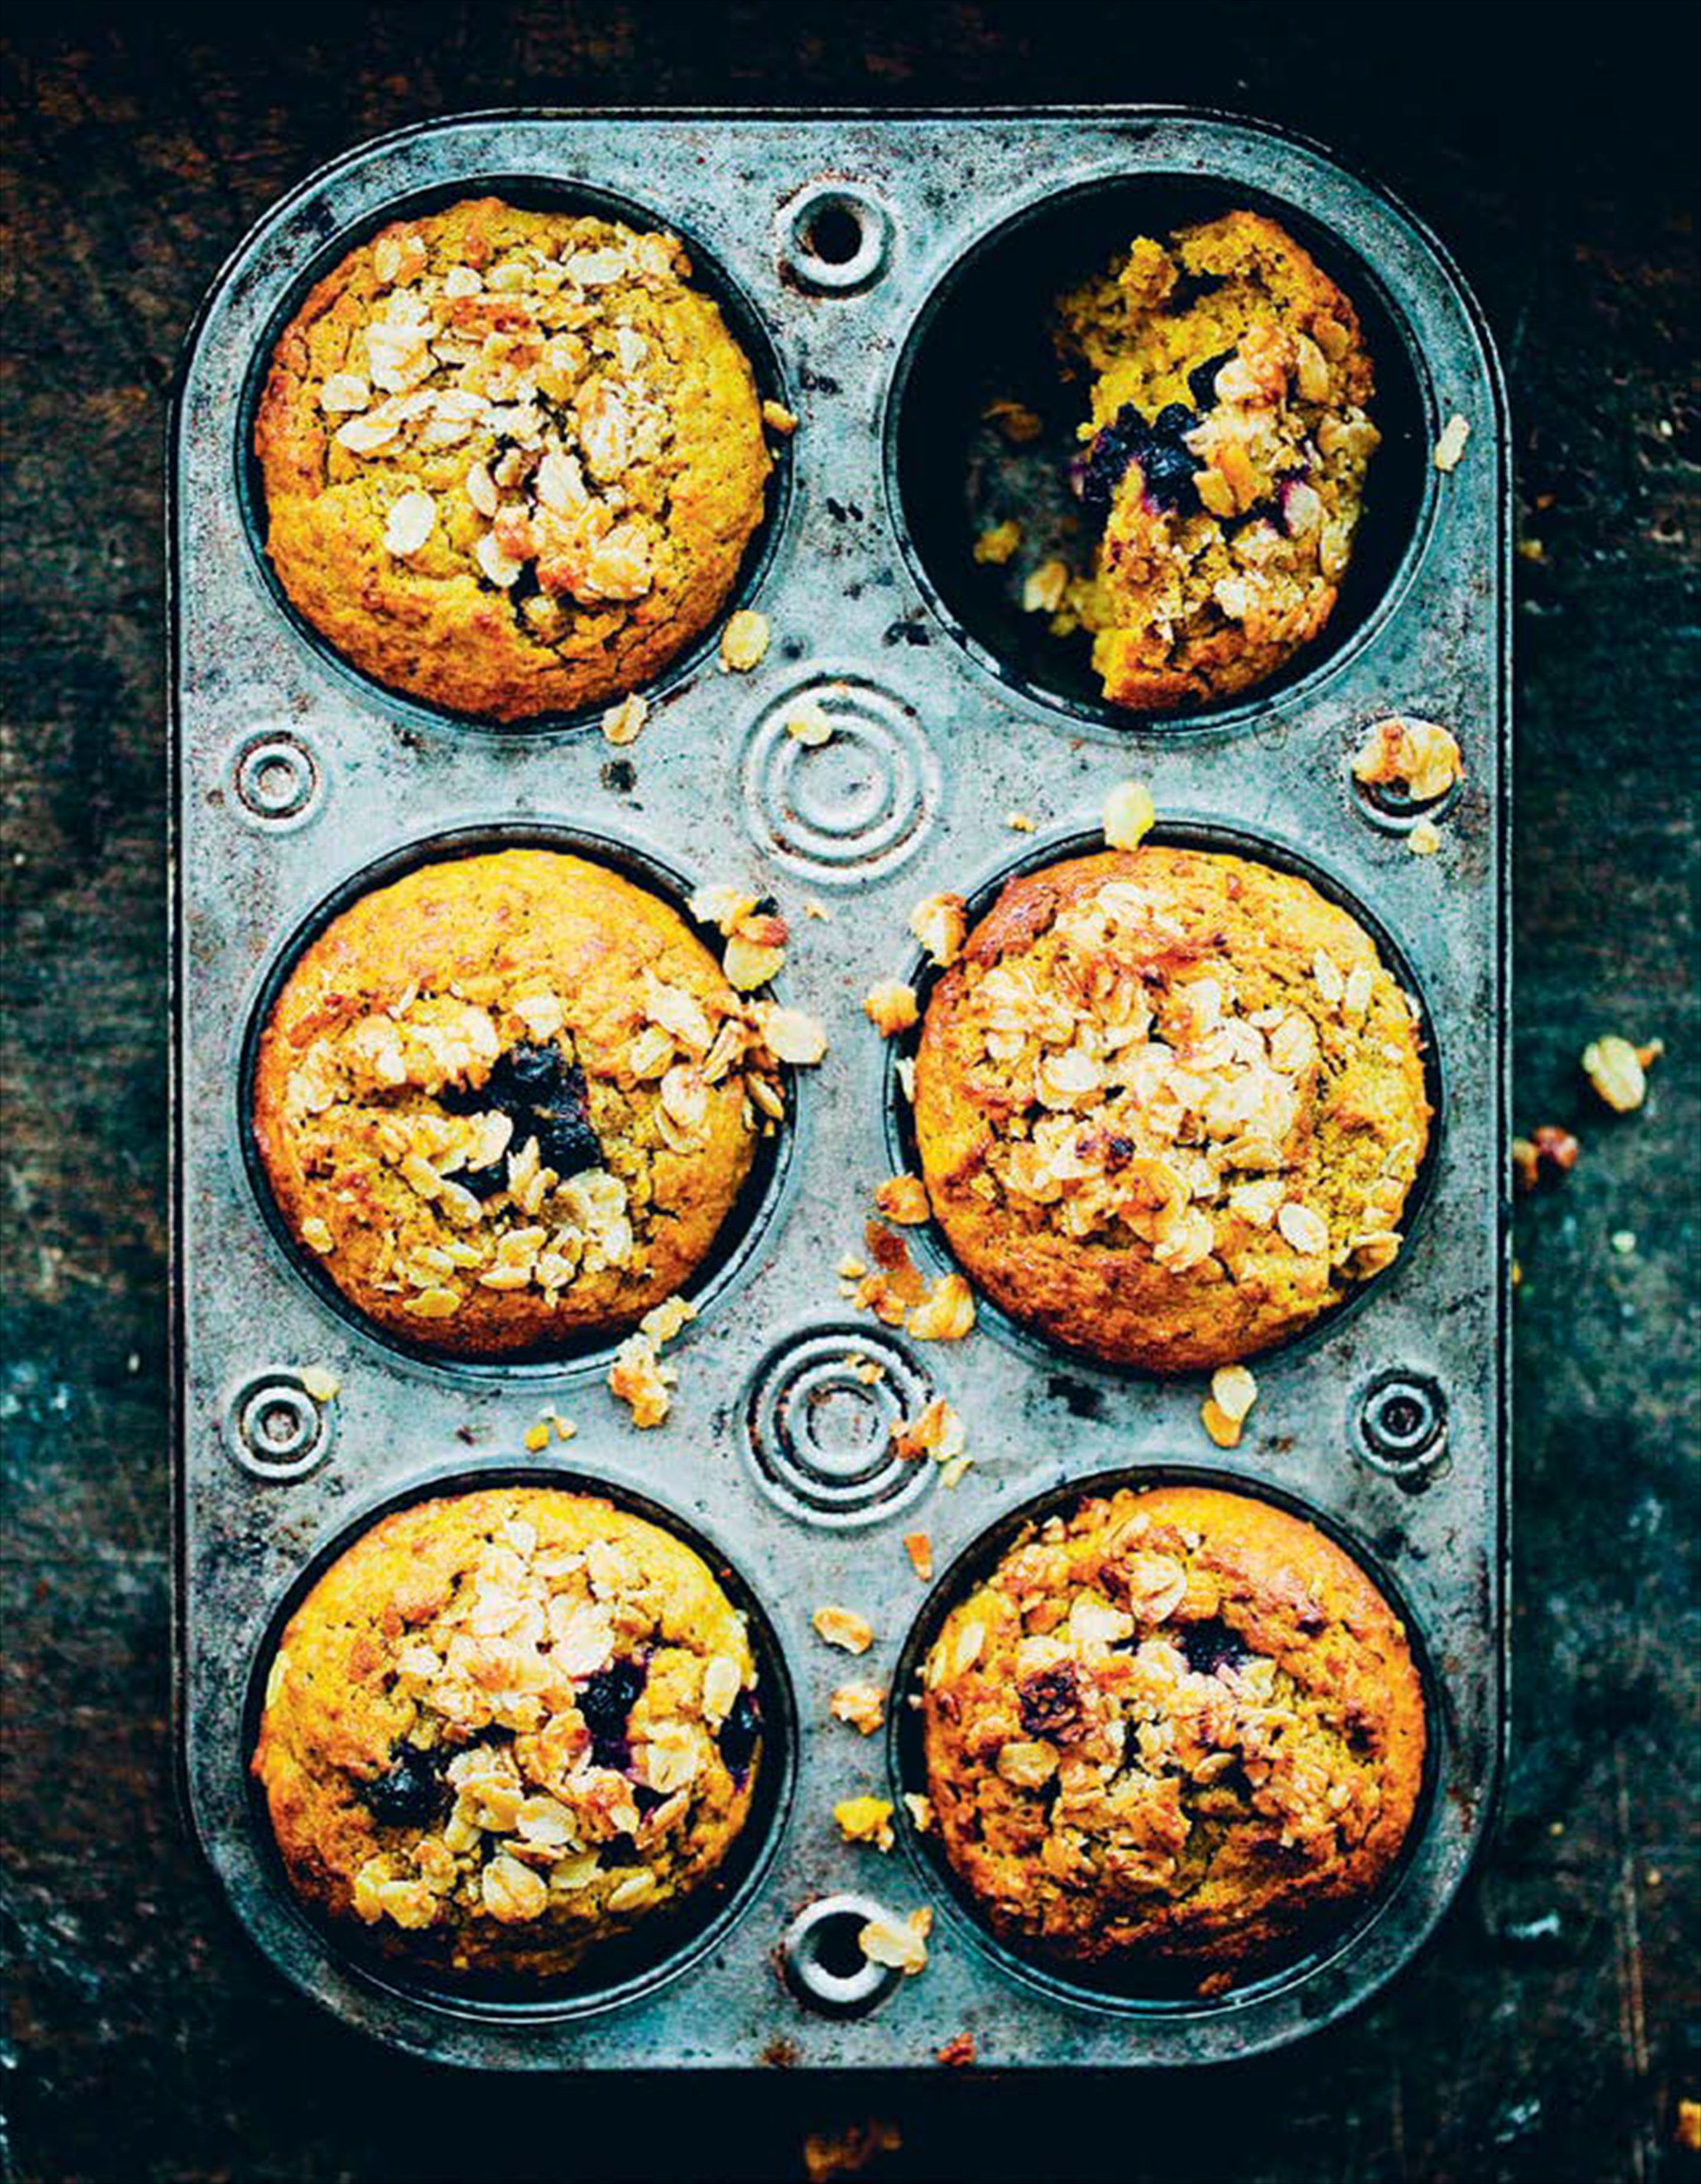 Turmeric and blueberry muffins with granola